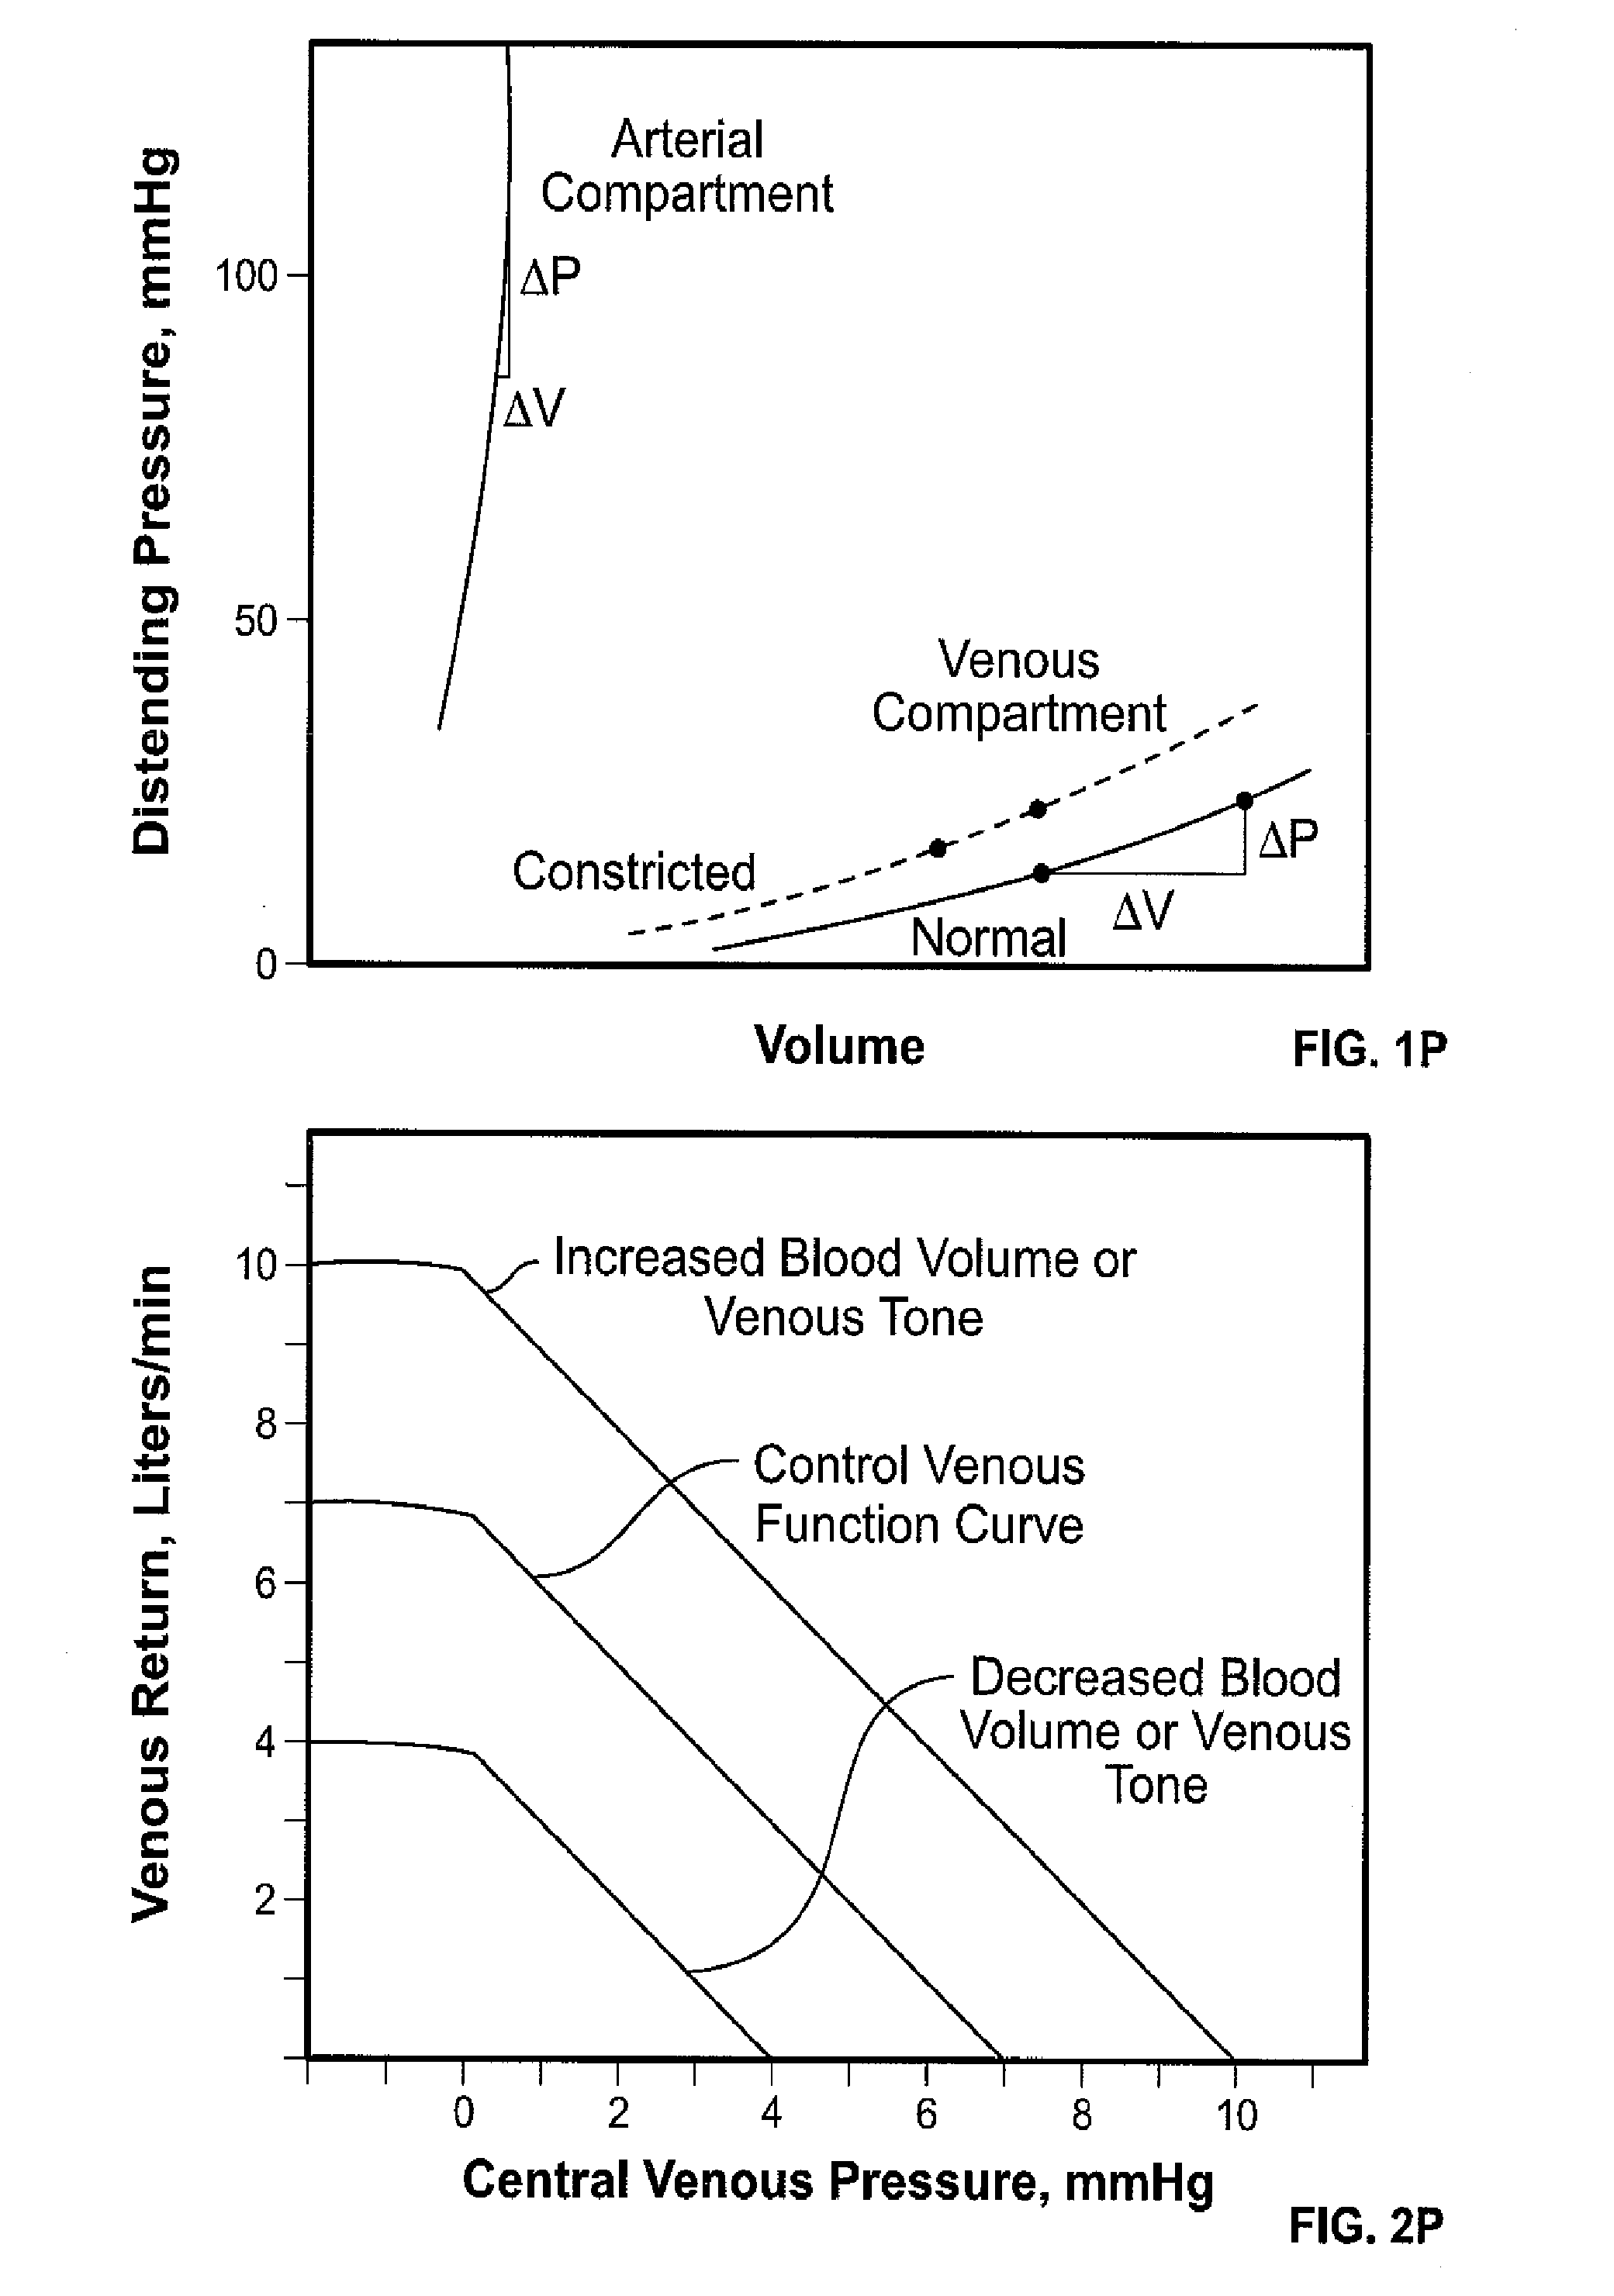 Apparatus, Systems and Methods Analyzing Pressure and Volume Waveforms in the Vasculature